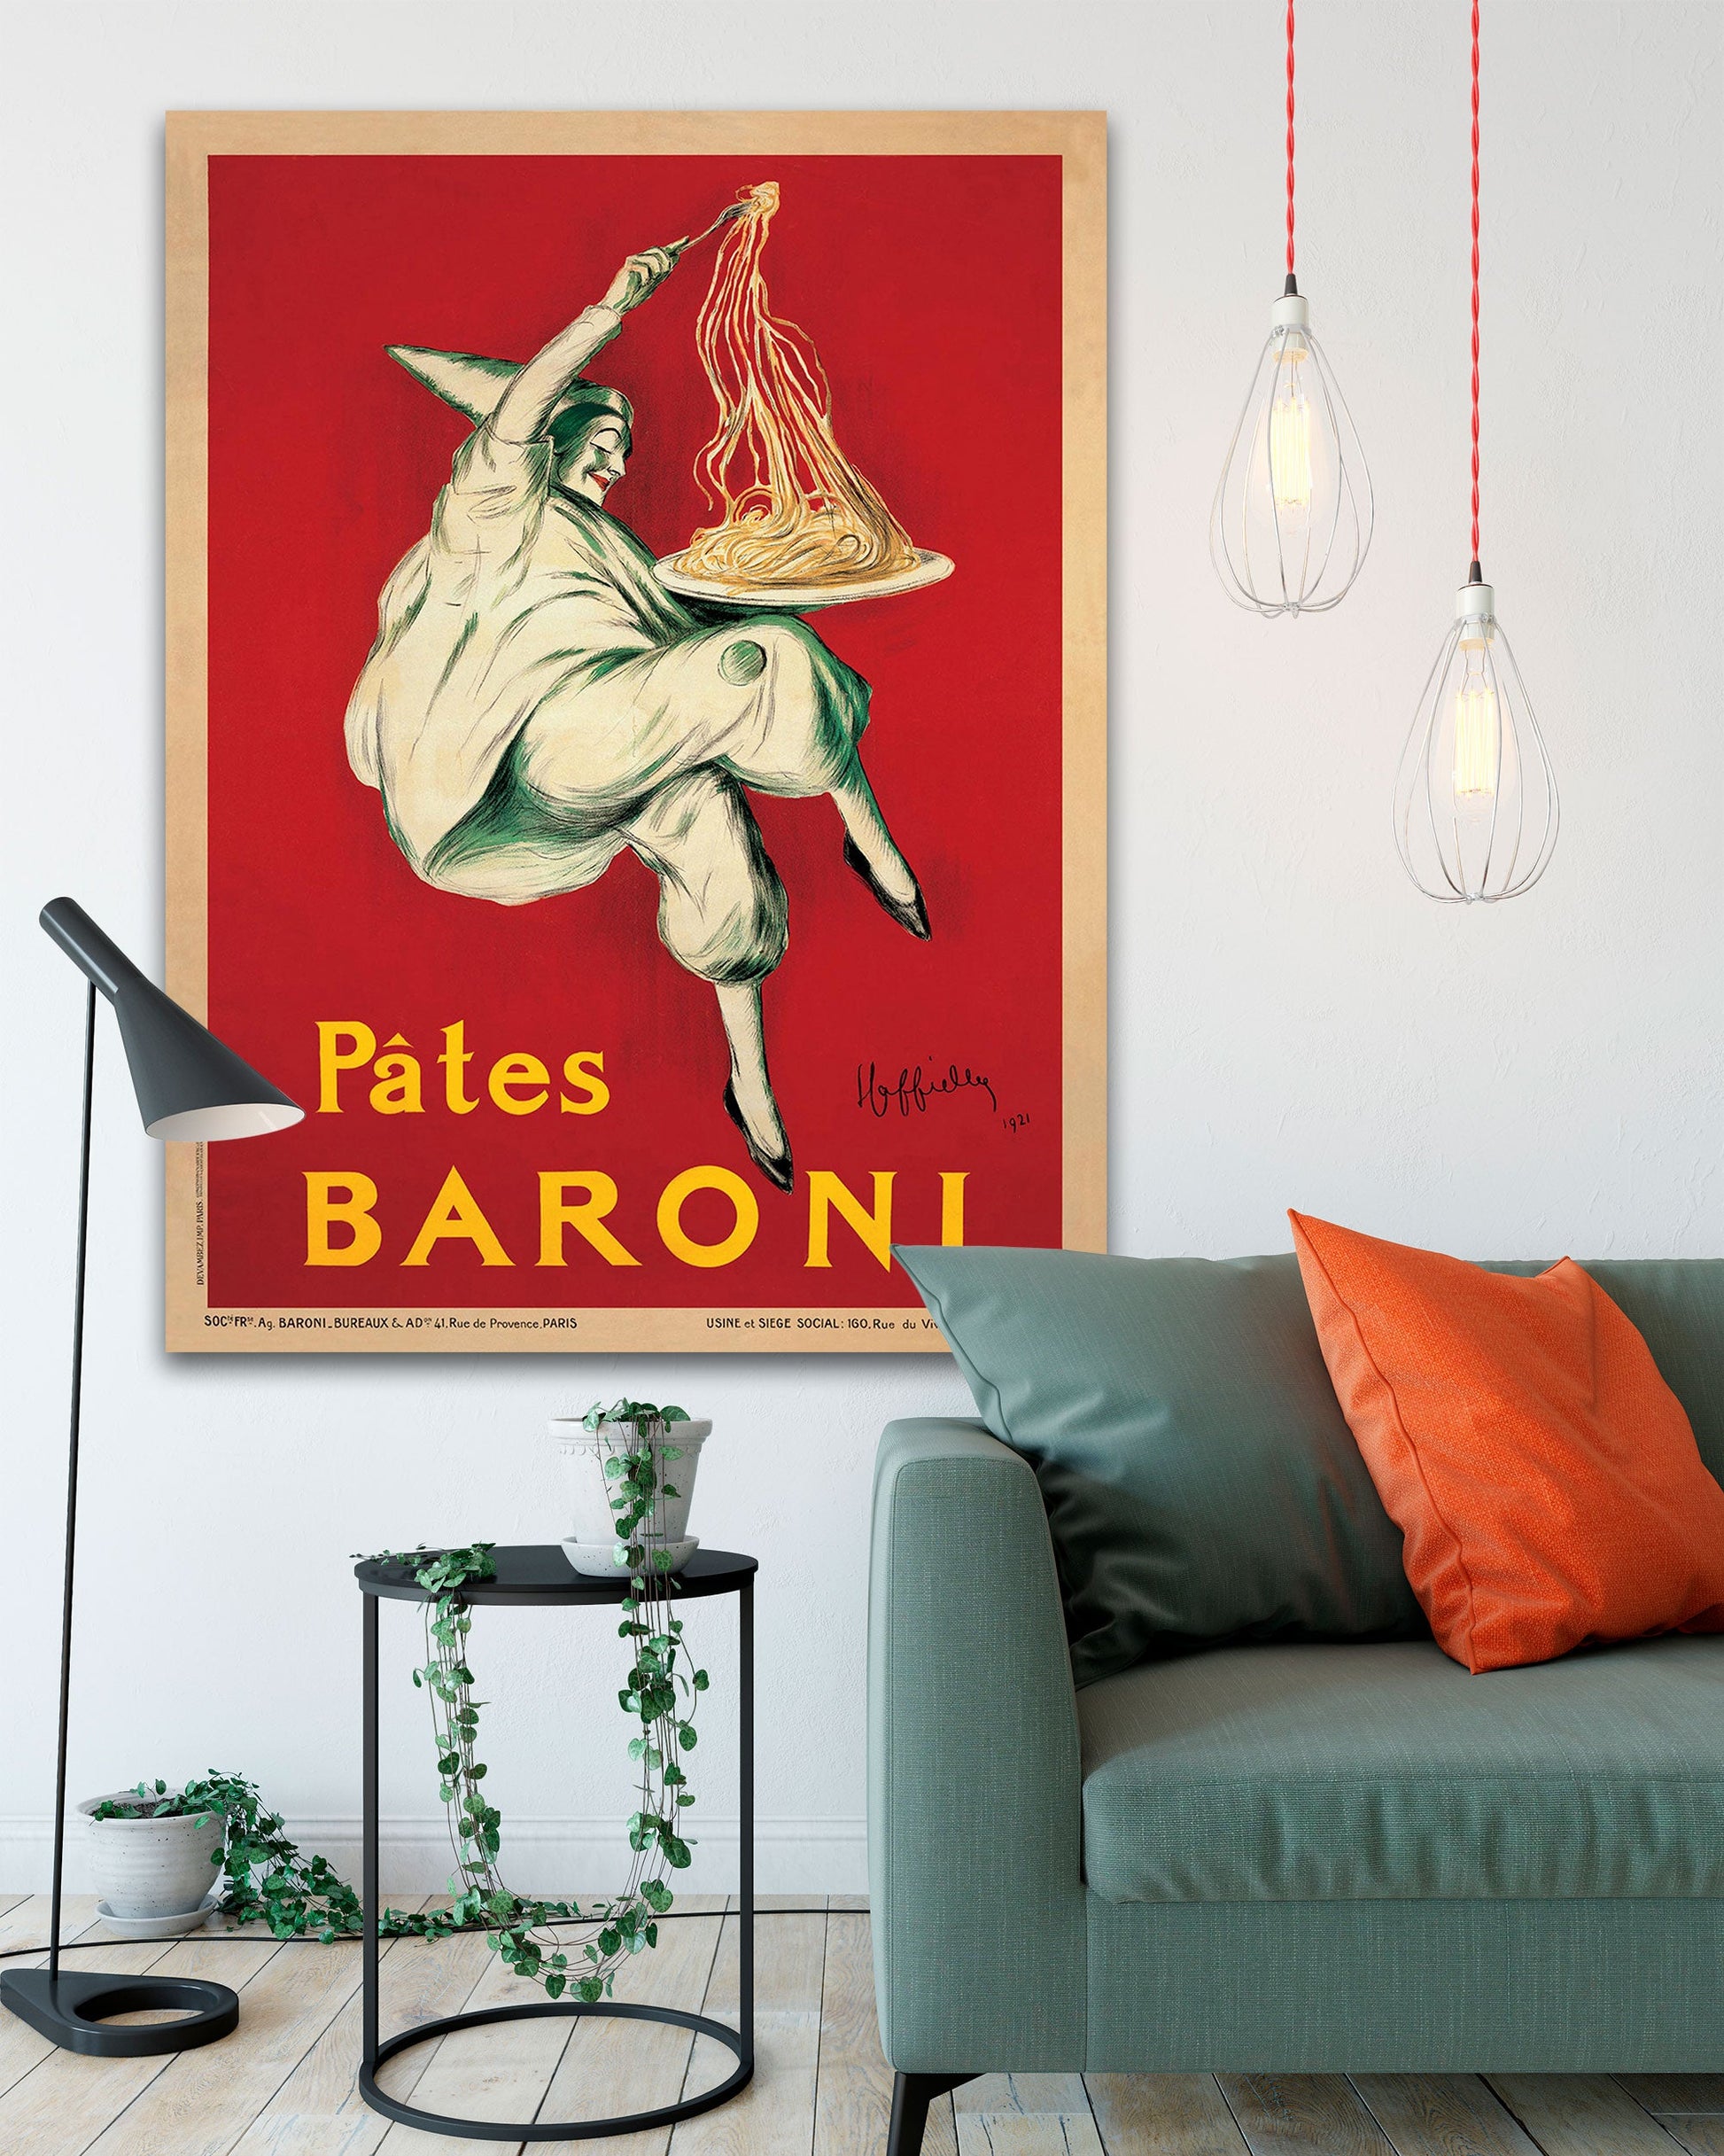 Vintage Pates Baroni Leonetto Cappiello Poster on Oversized Canvas and hanging in a living room - Transit Design 